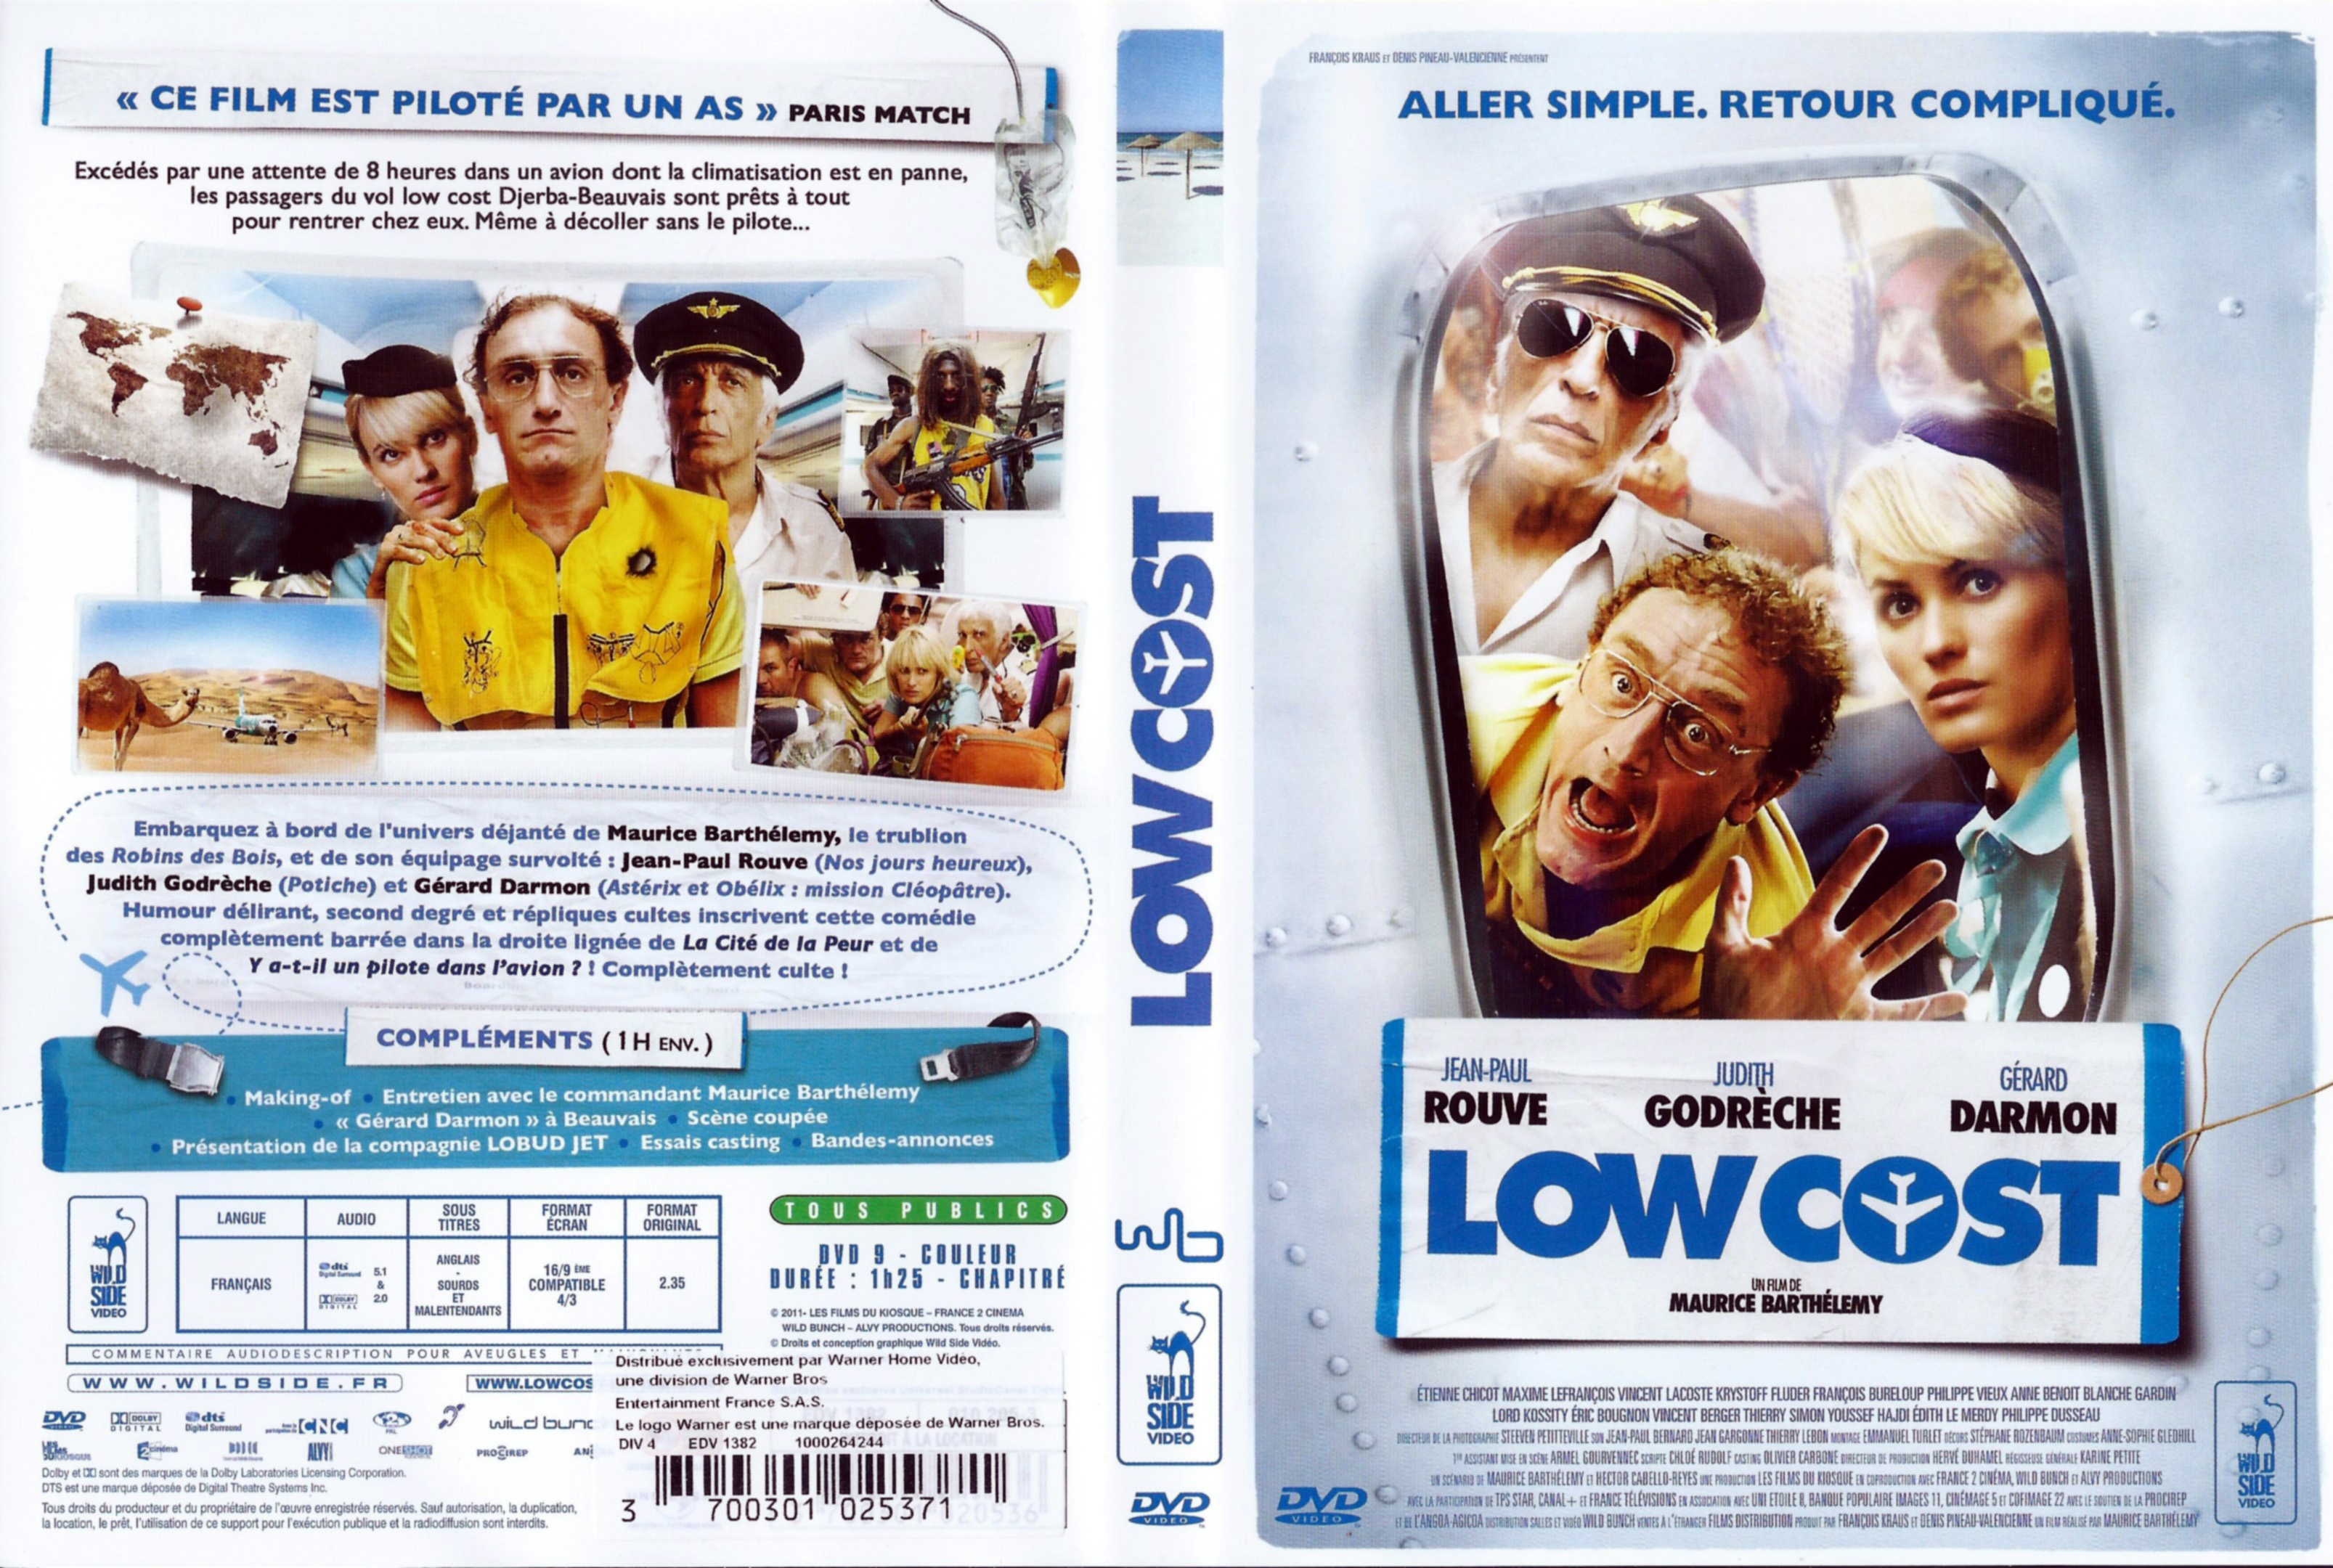 Jaquette DVD Low cost v2